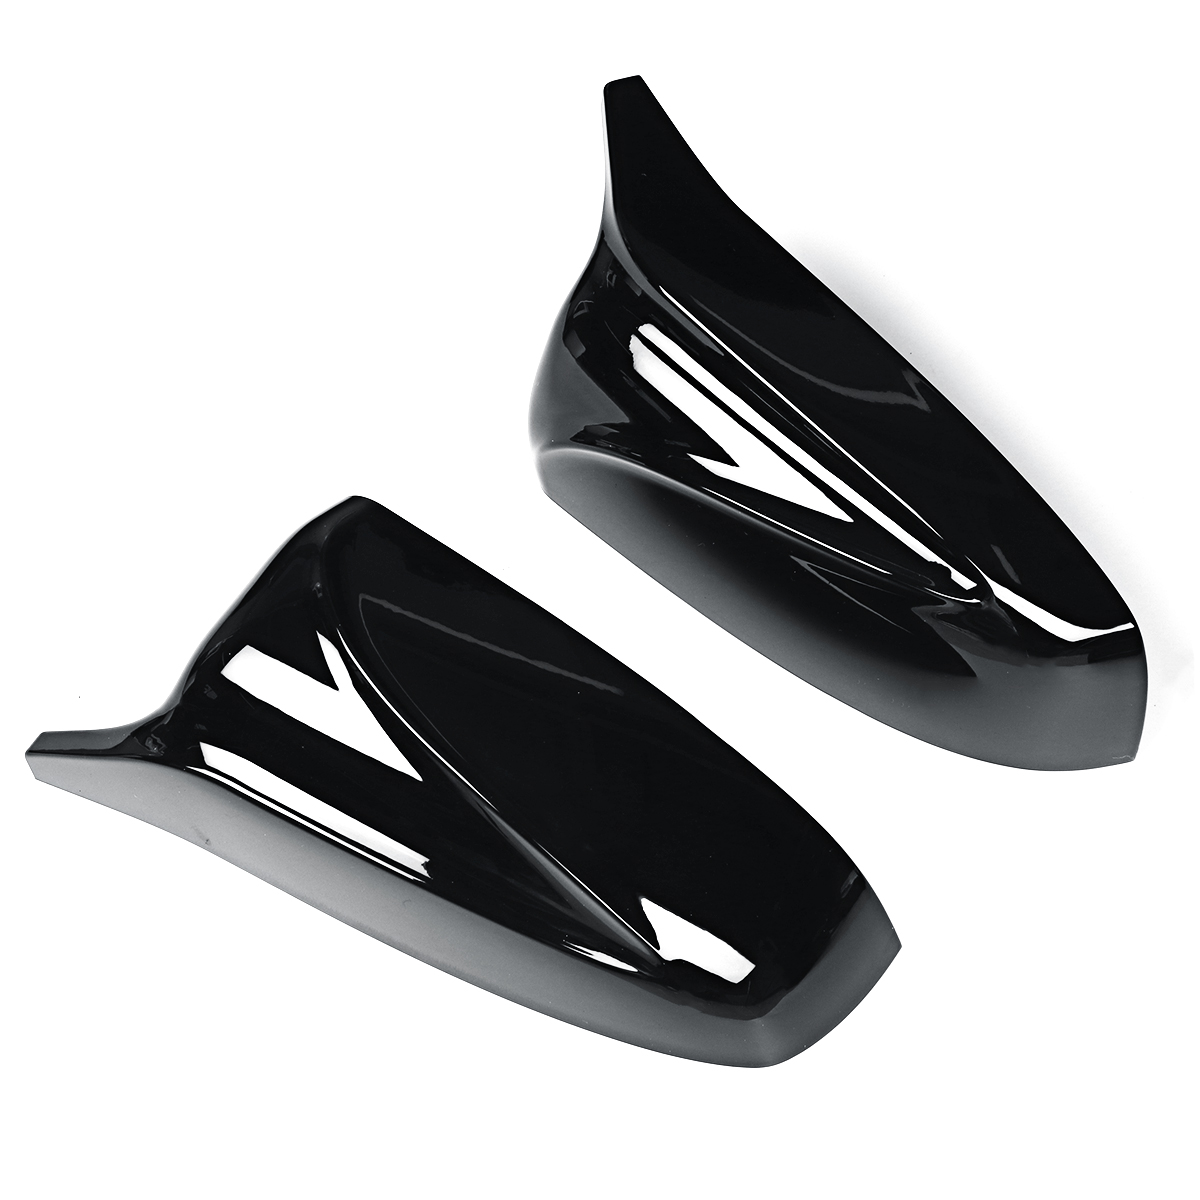 Glossy Black M Style Rear View Mirror Cap Cover Replacement Pair for BMW X5 X6 E70 E71 2007-2013